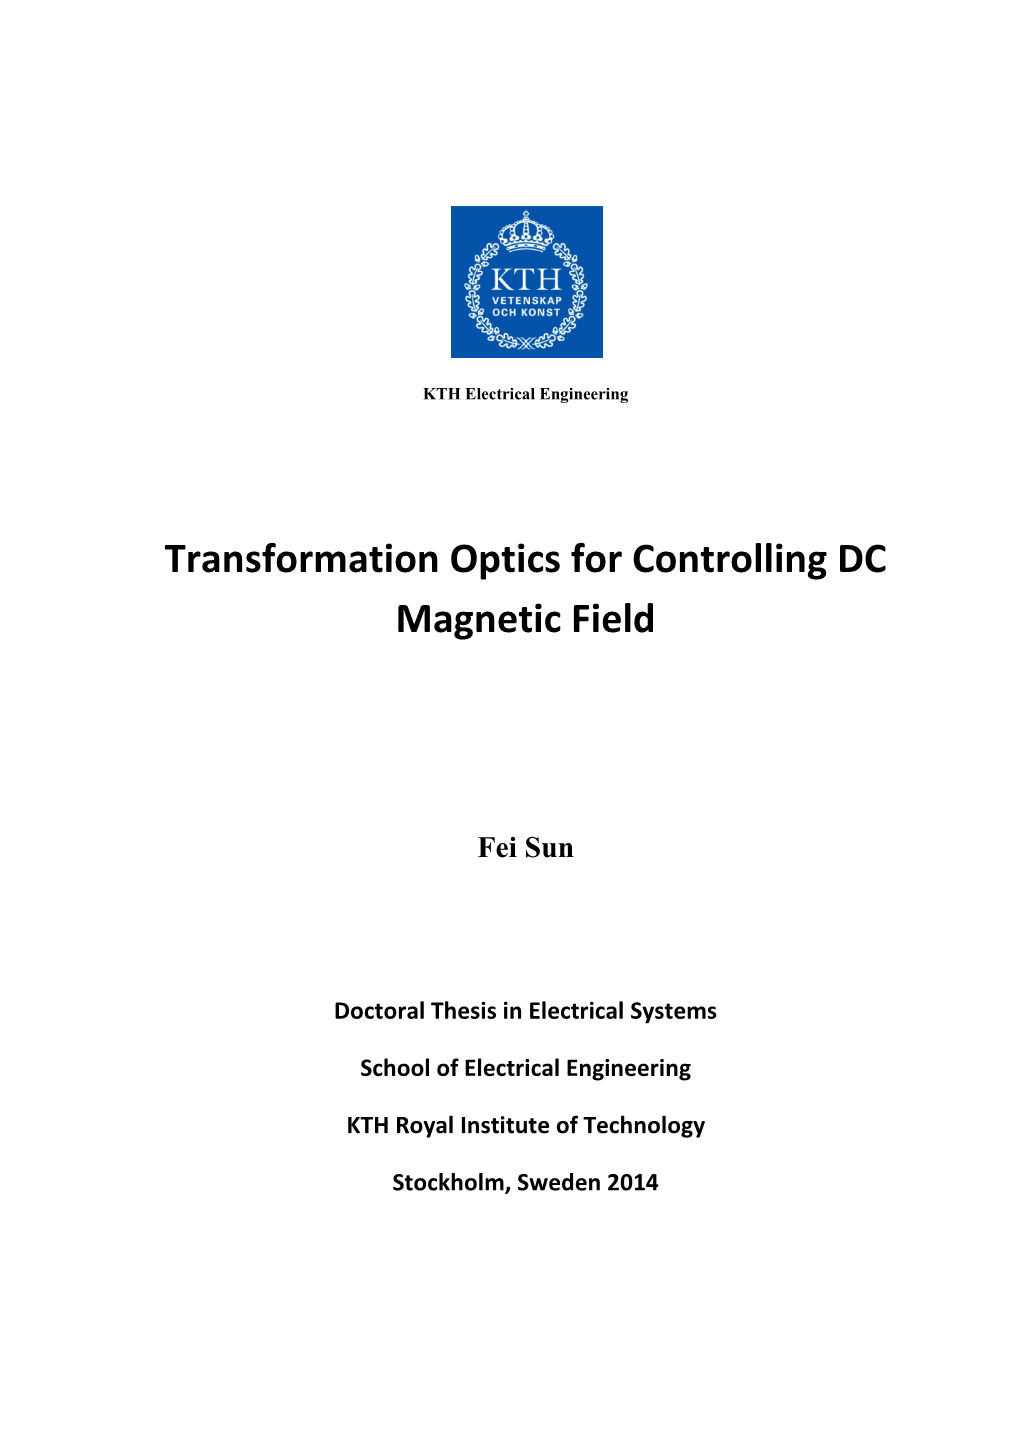 Transformation Optics for Controlling DC Magnetic Field